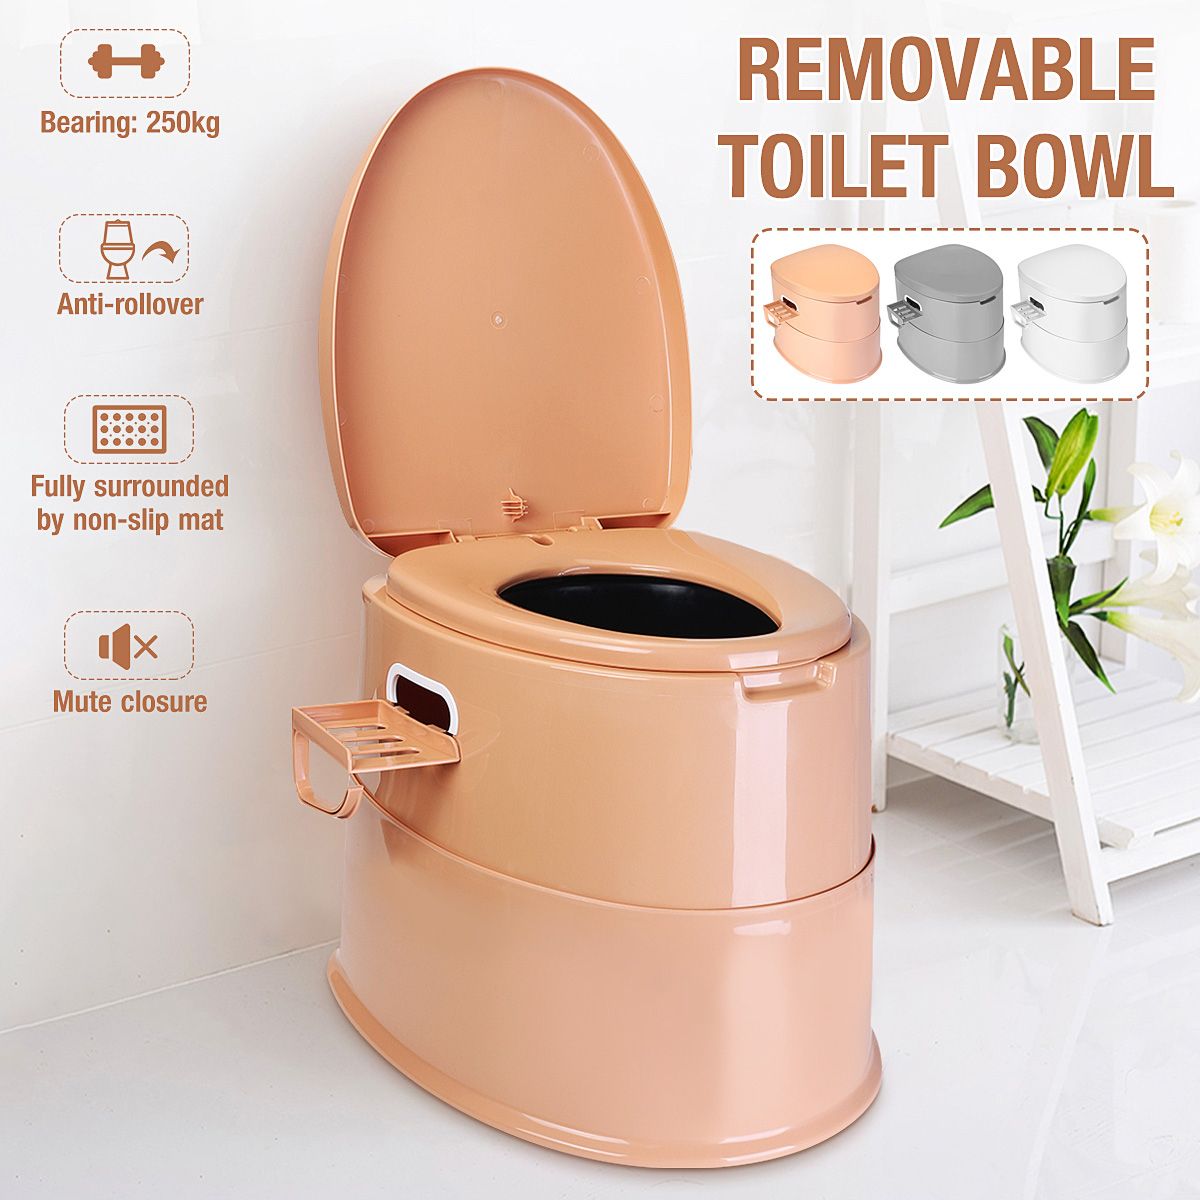 Portable-Toilet-Squatting-Woman-Movable-Toilet-Bedpan-Paper-Roll-Holder-1696523